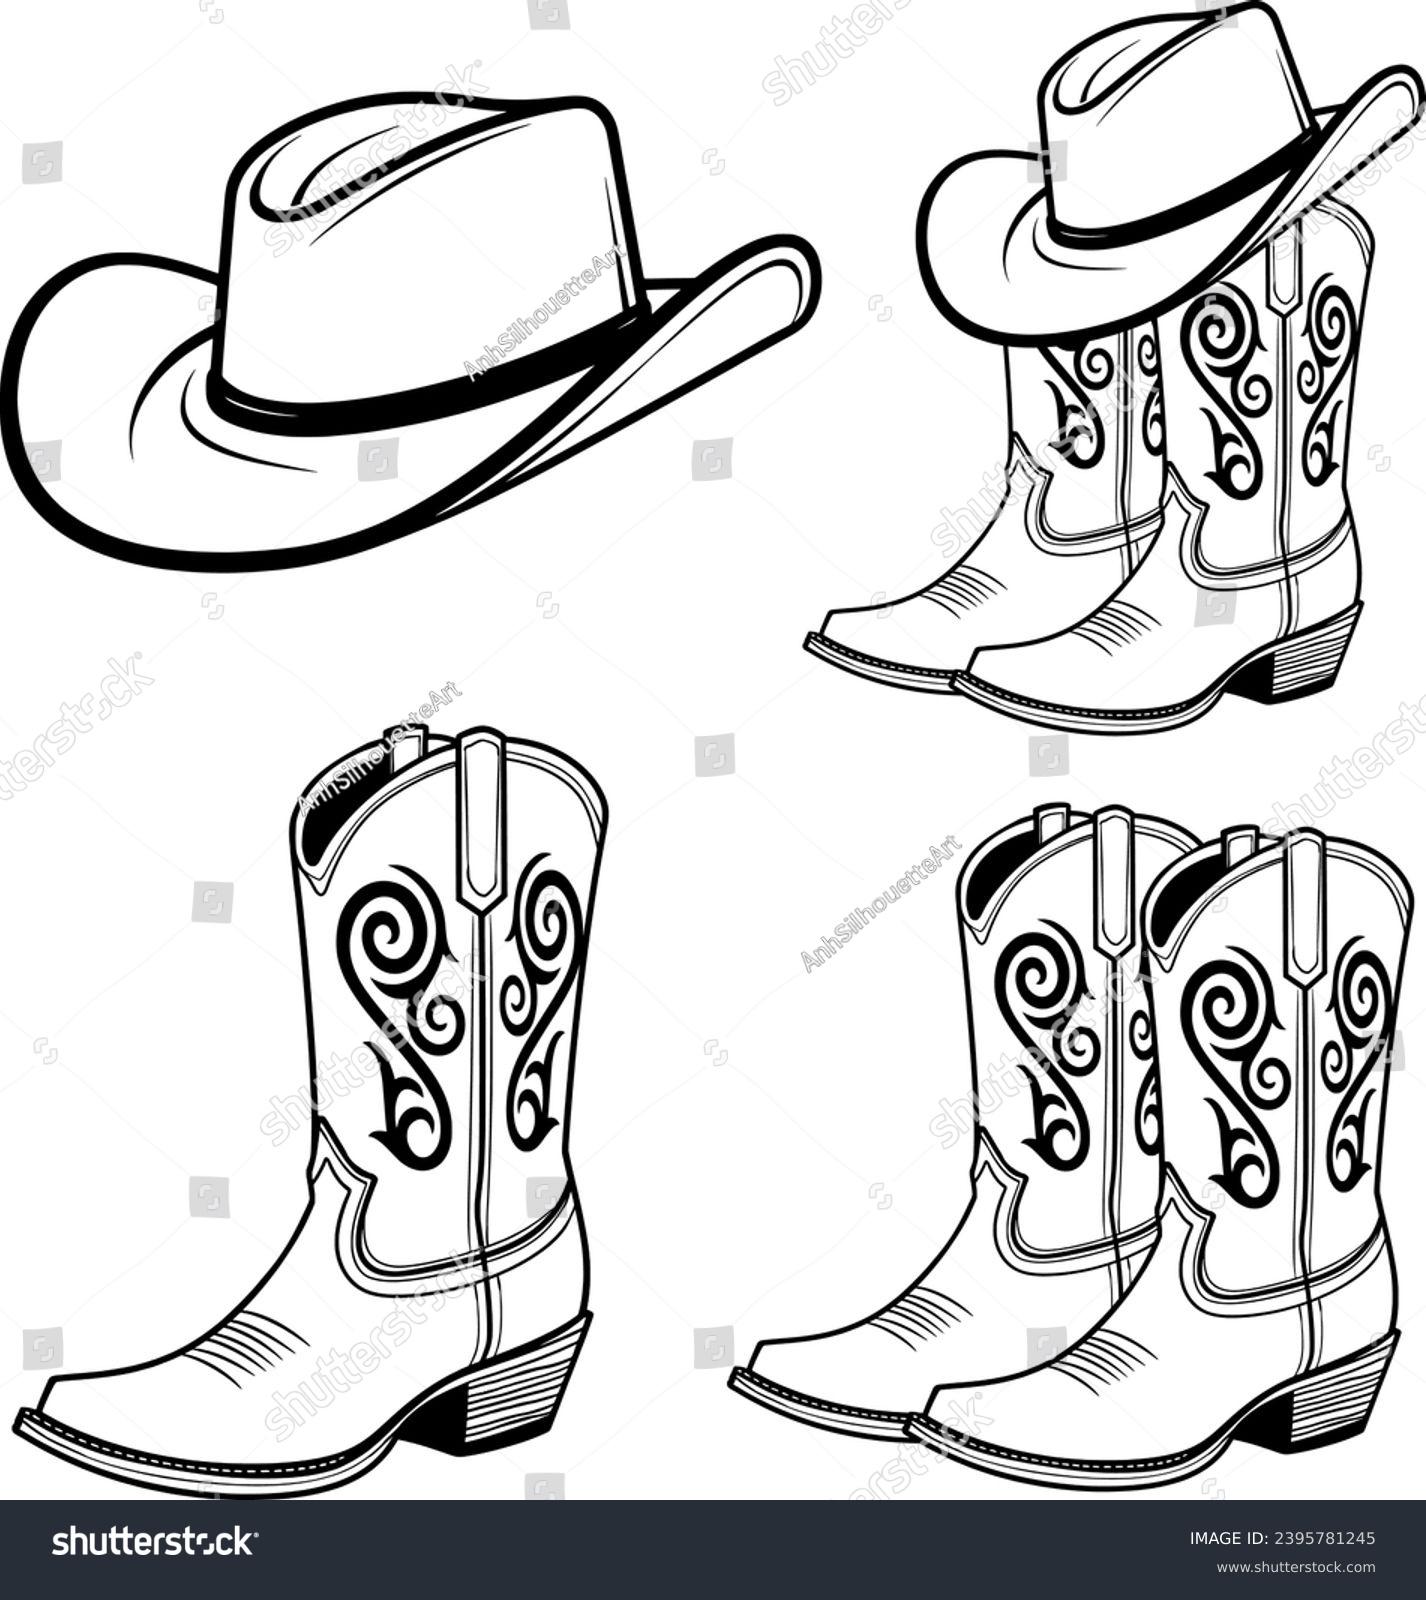 SVG of Cowboy Boots Bundle, Cowboy Boots Hand-Drawn, Cowboy, Cowboy Hat, Western Boots, Boots Silhouette, Rodeo, Ranch, cowgirl boot, wild west, western shoes svg